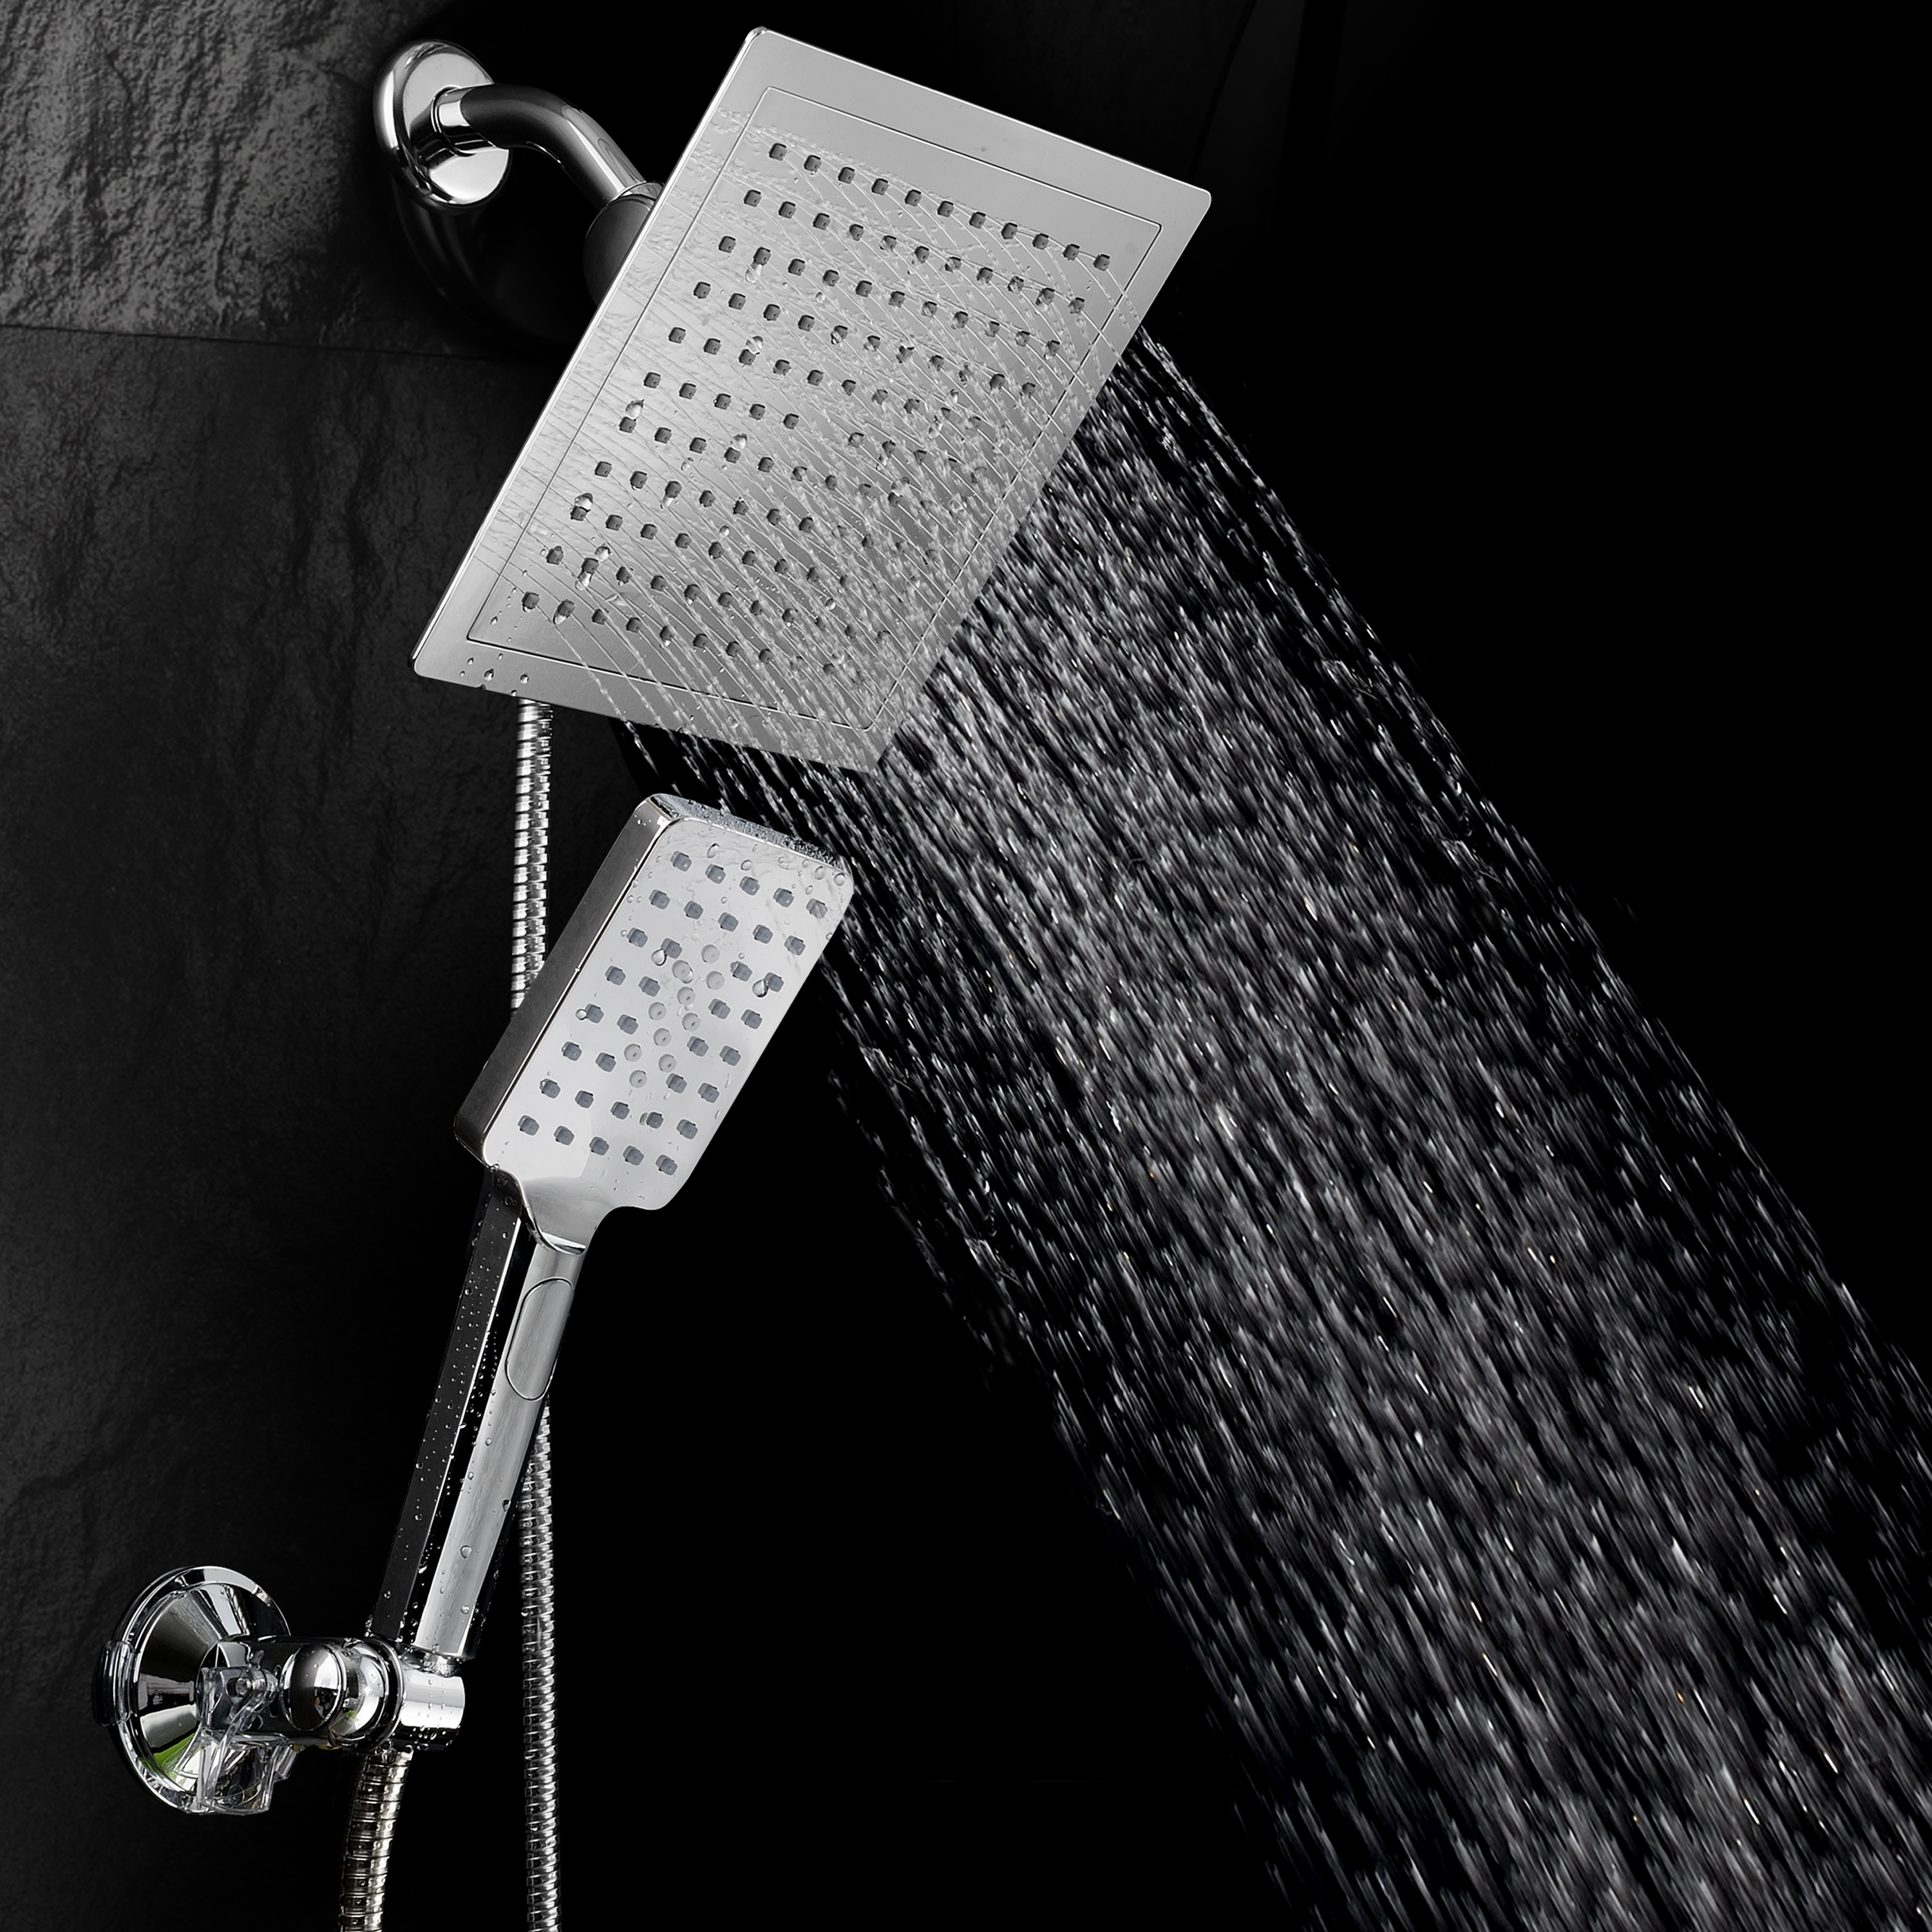 DreamSpa Ultra-Luxury 9-Inch Square Rainfall Combo with Push-Control Handheld Shower and Low-Reach Wall Bracket, Chrome - image 4 of 7